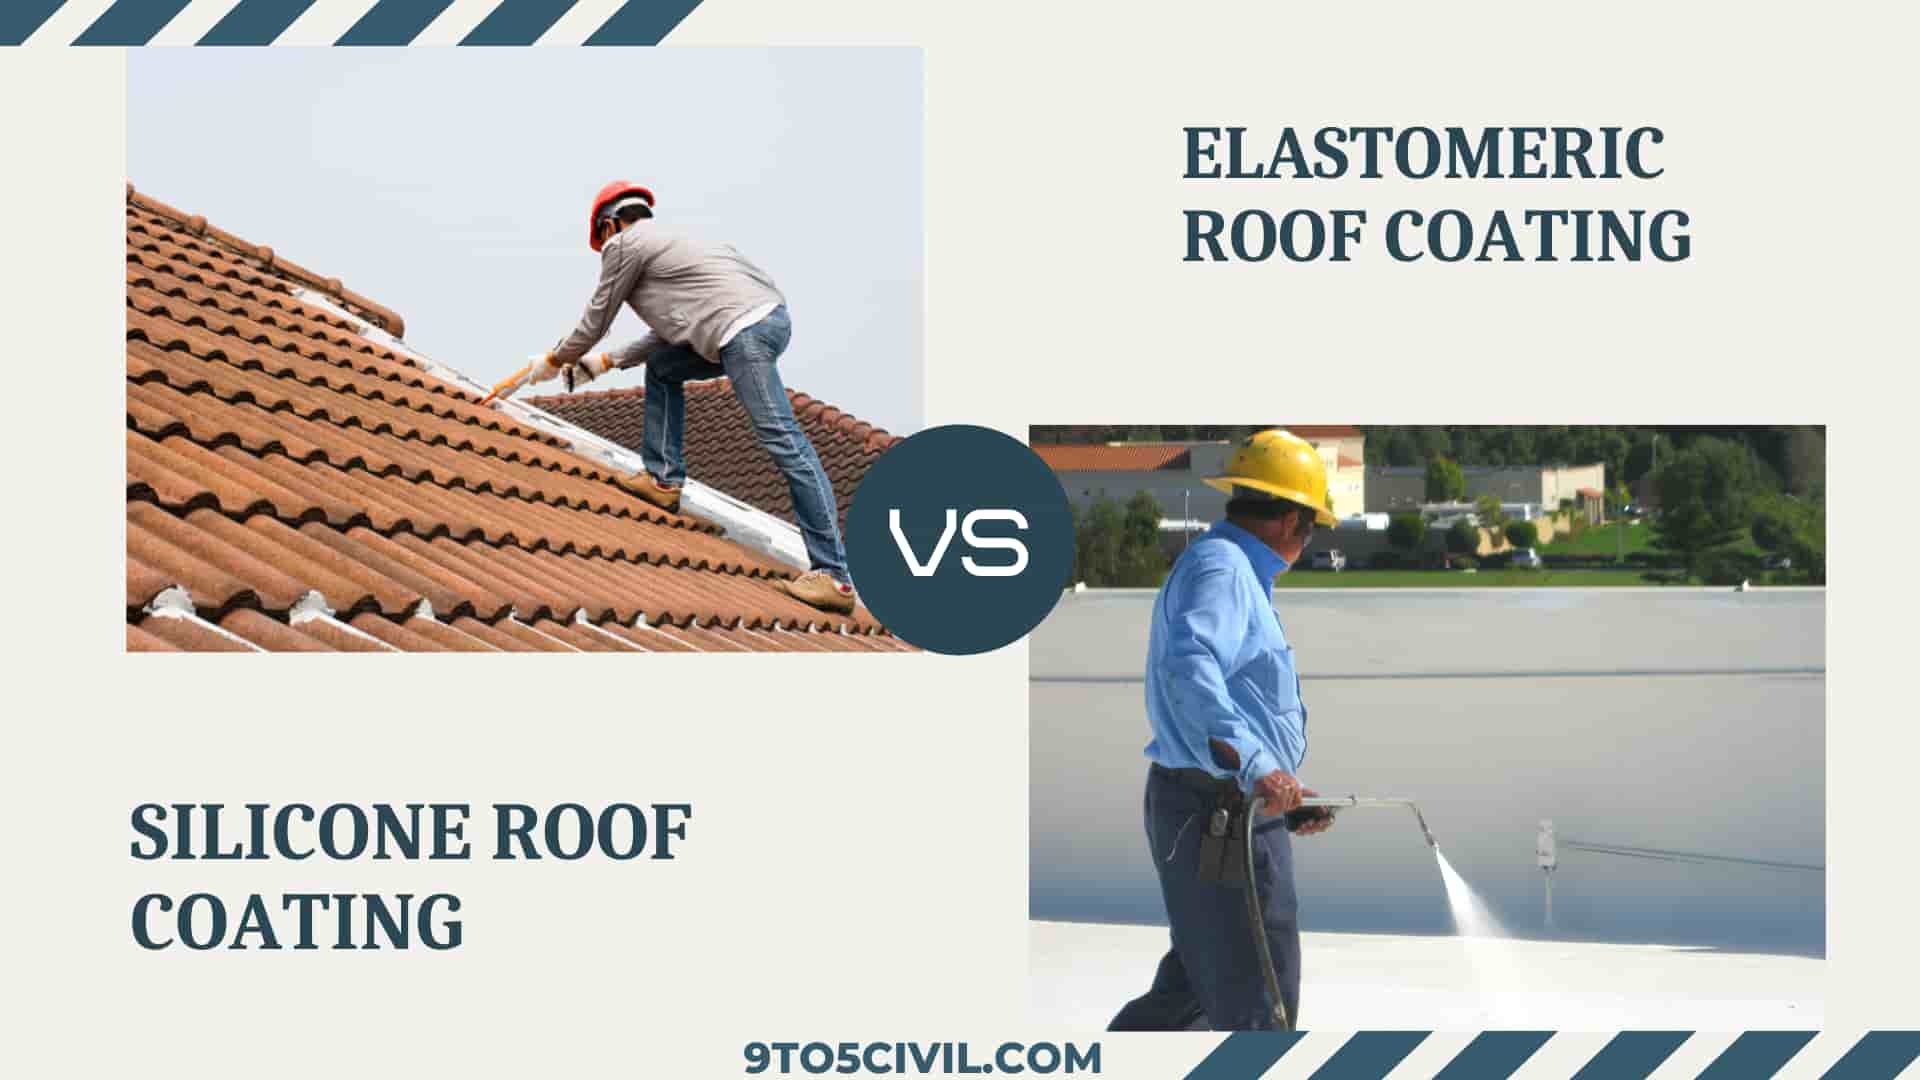 SiliconeElastomeric Vs Silicone Roof Coating Roof Coating Pros and Cons